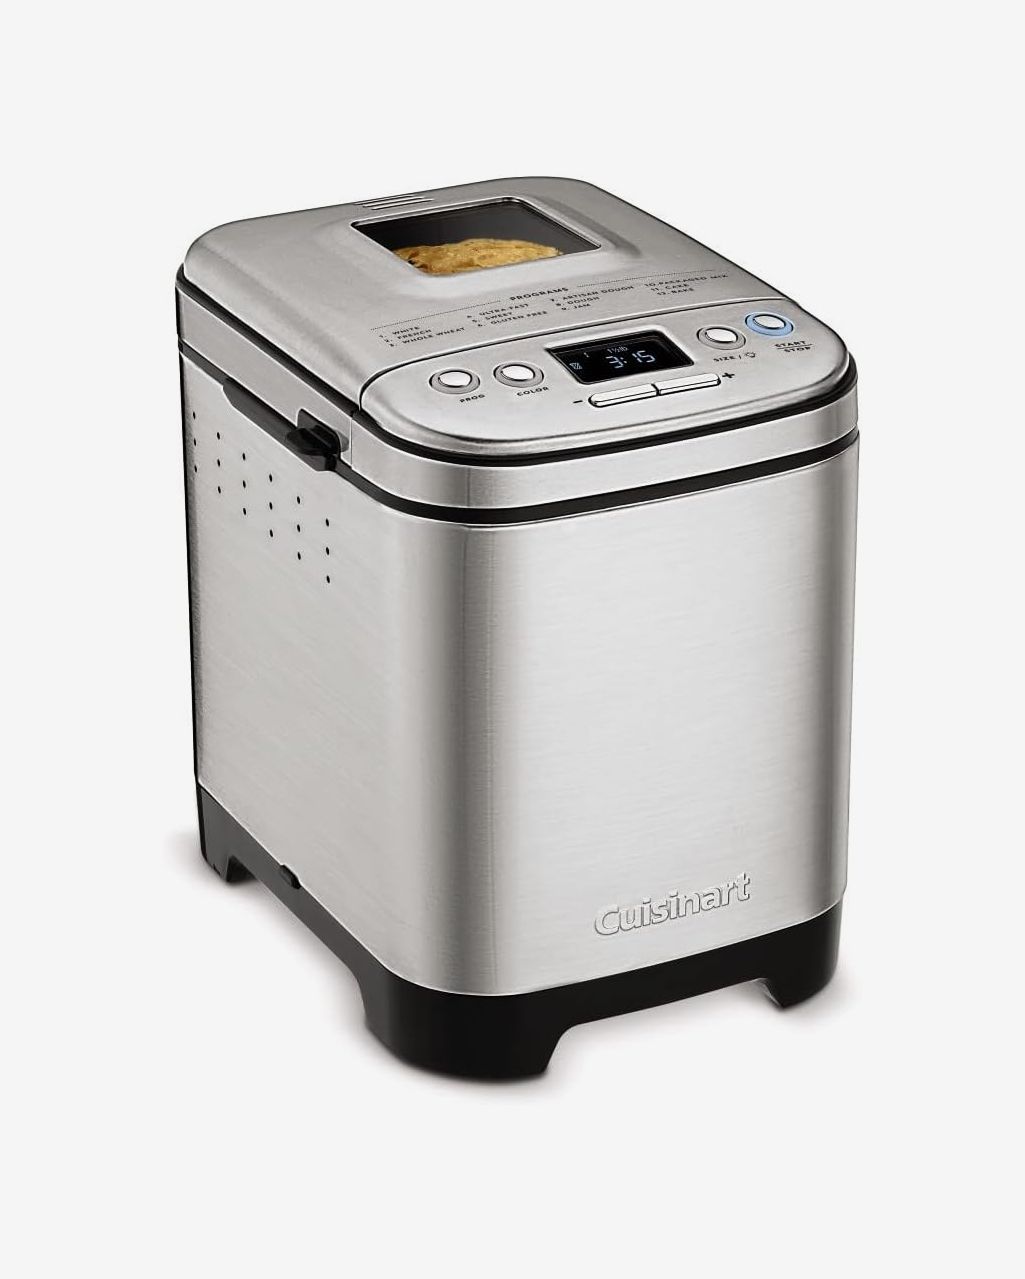 Best Bread Machines 2021: Top-Reviewed Home Bread Makers for Baking